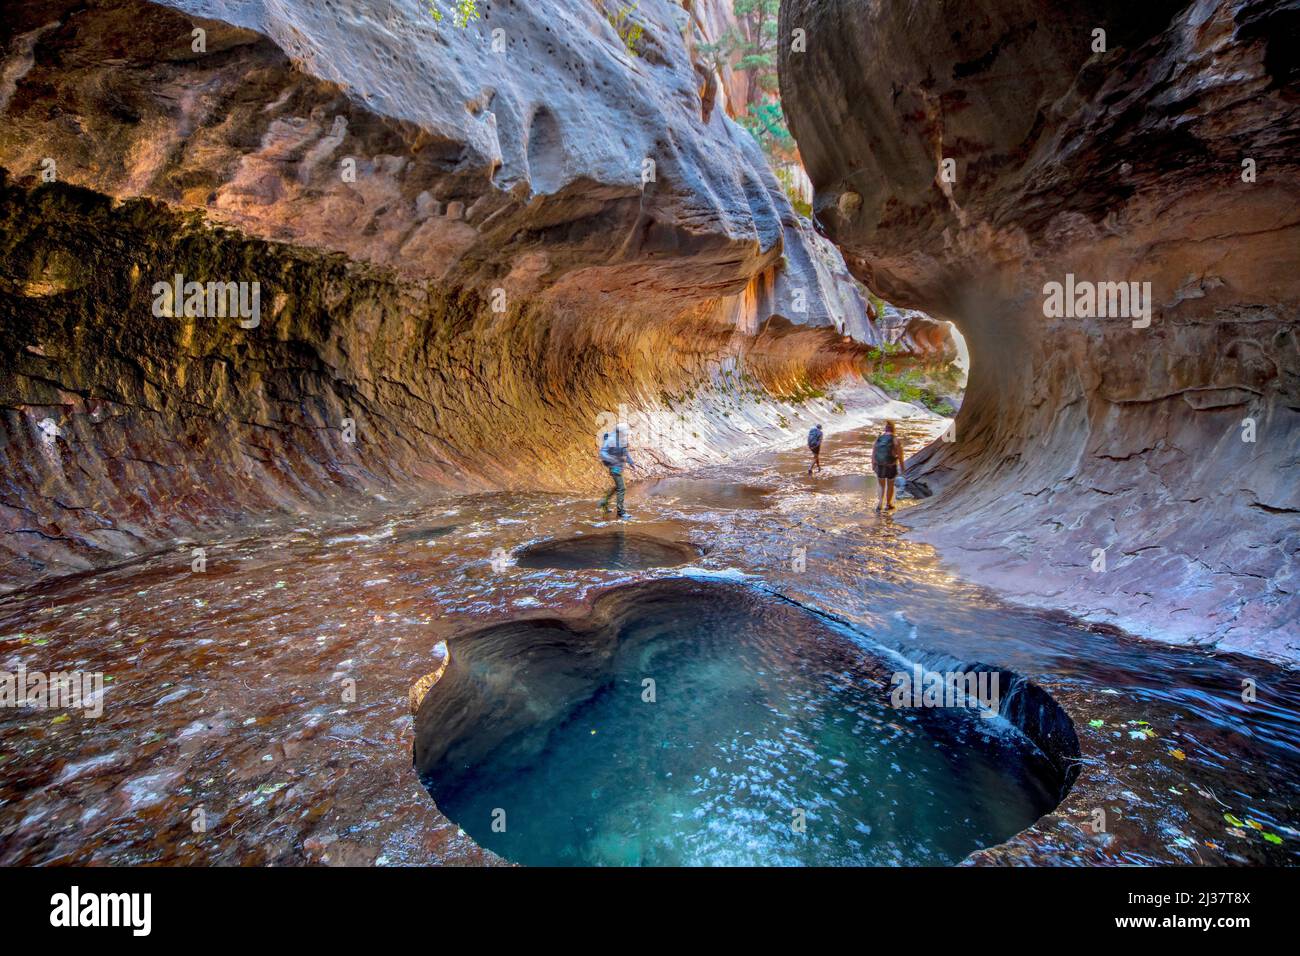 Erosion has shaped the sandstone walls at The Subway at Zion National Parkâ.s Left Fork of North Creek. Stock Photo